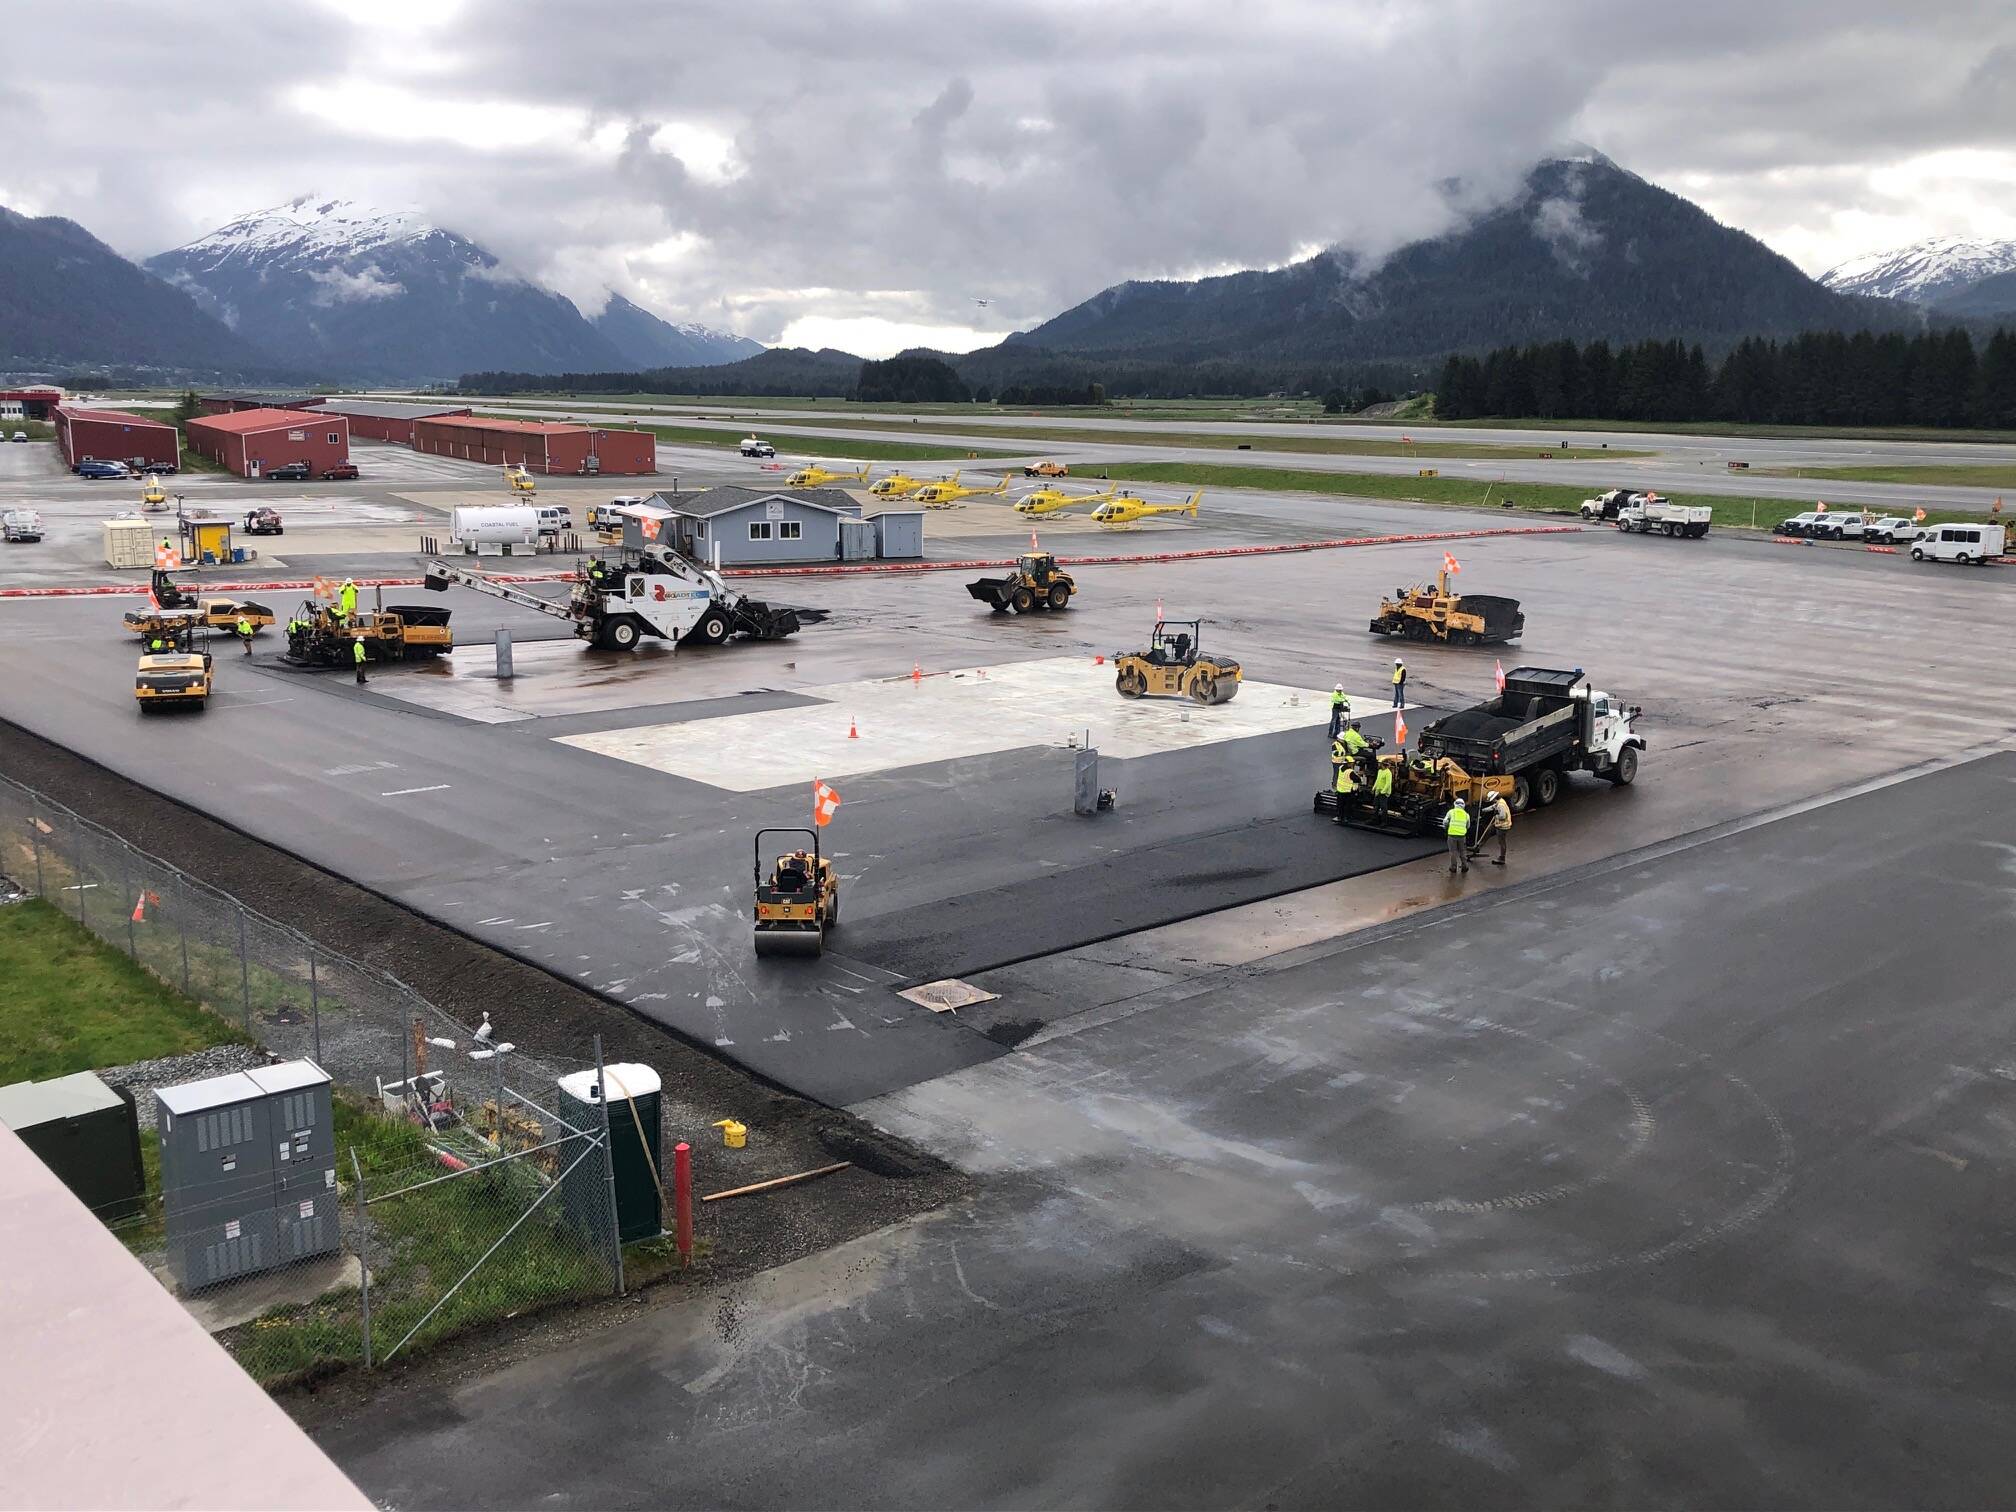 A photo taken from the terminal roof shows the extent of the first phase of paving to accommodate large aircraft. (Mike Greene / City and Borough of Juneau)